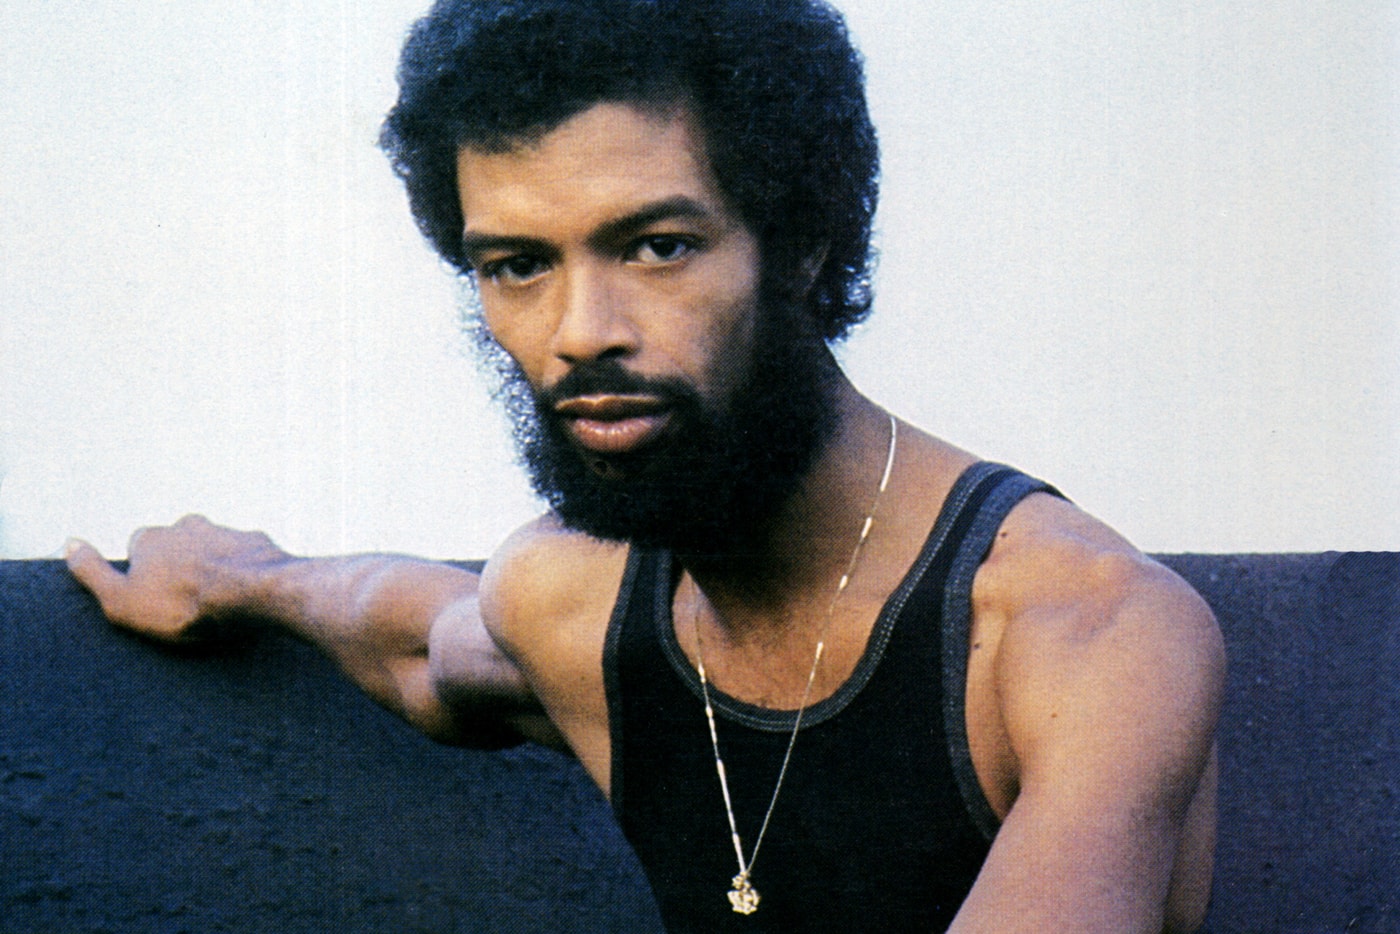 gil-scott-heron-featuring-mos-def-new-york-is-killing-me